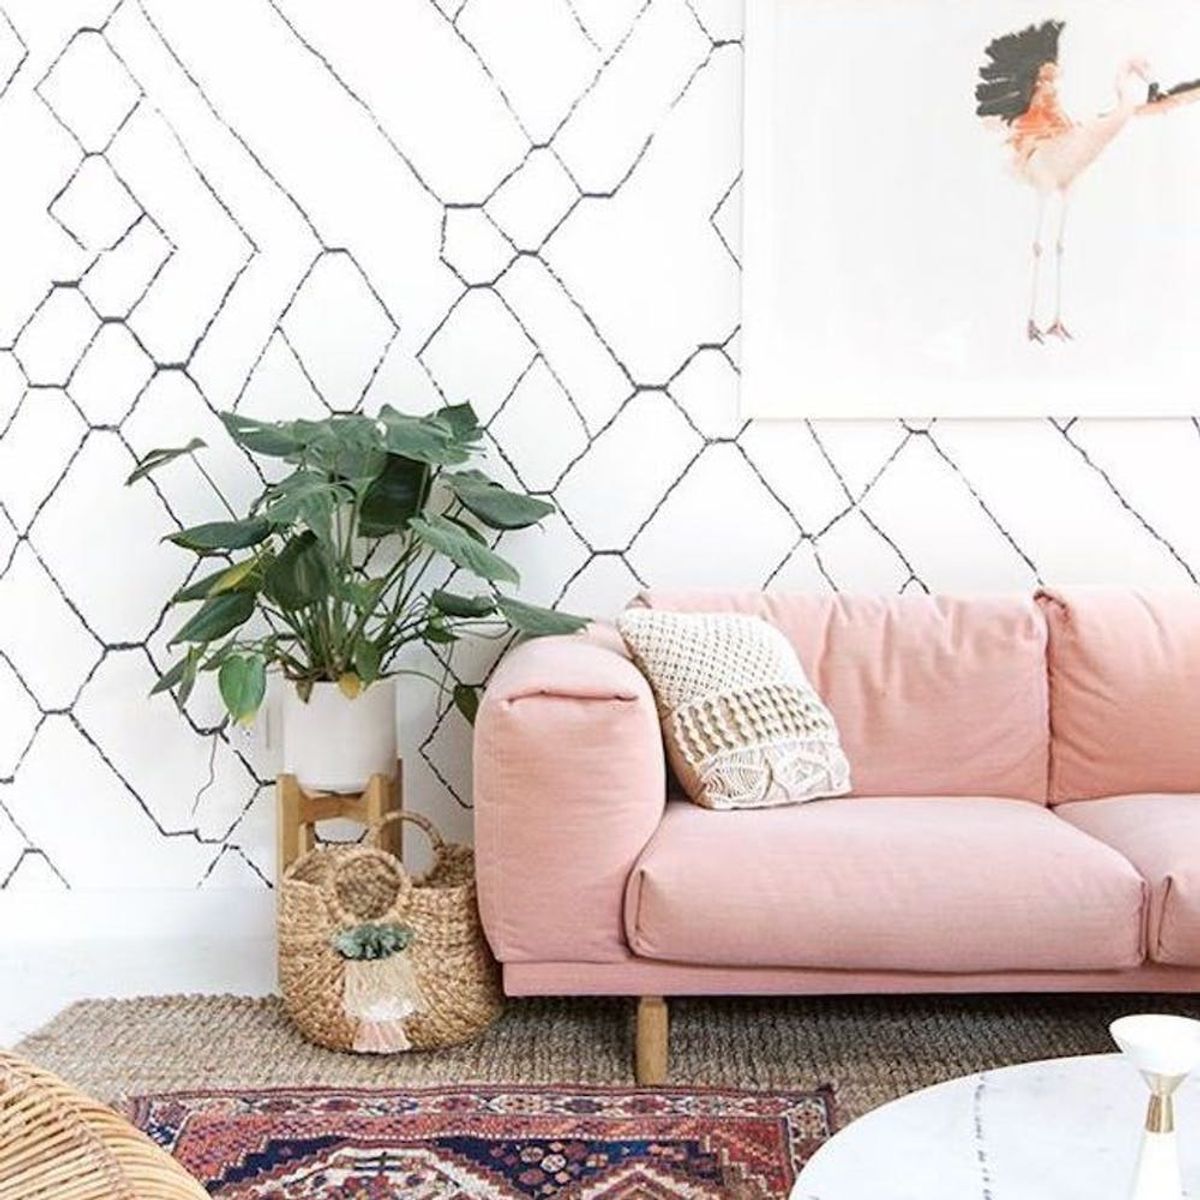 12 Genius Decor Tips for Adding Texture to Your Home